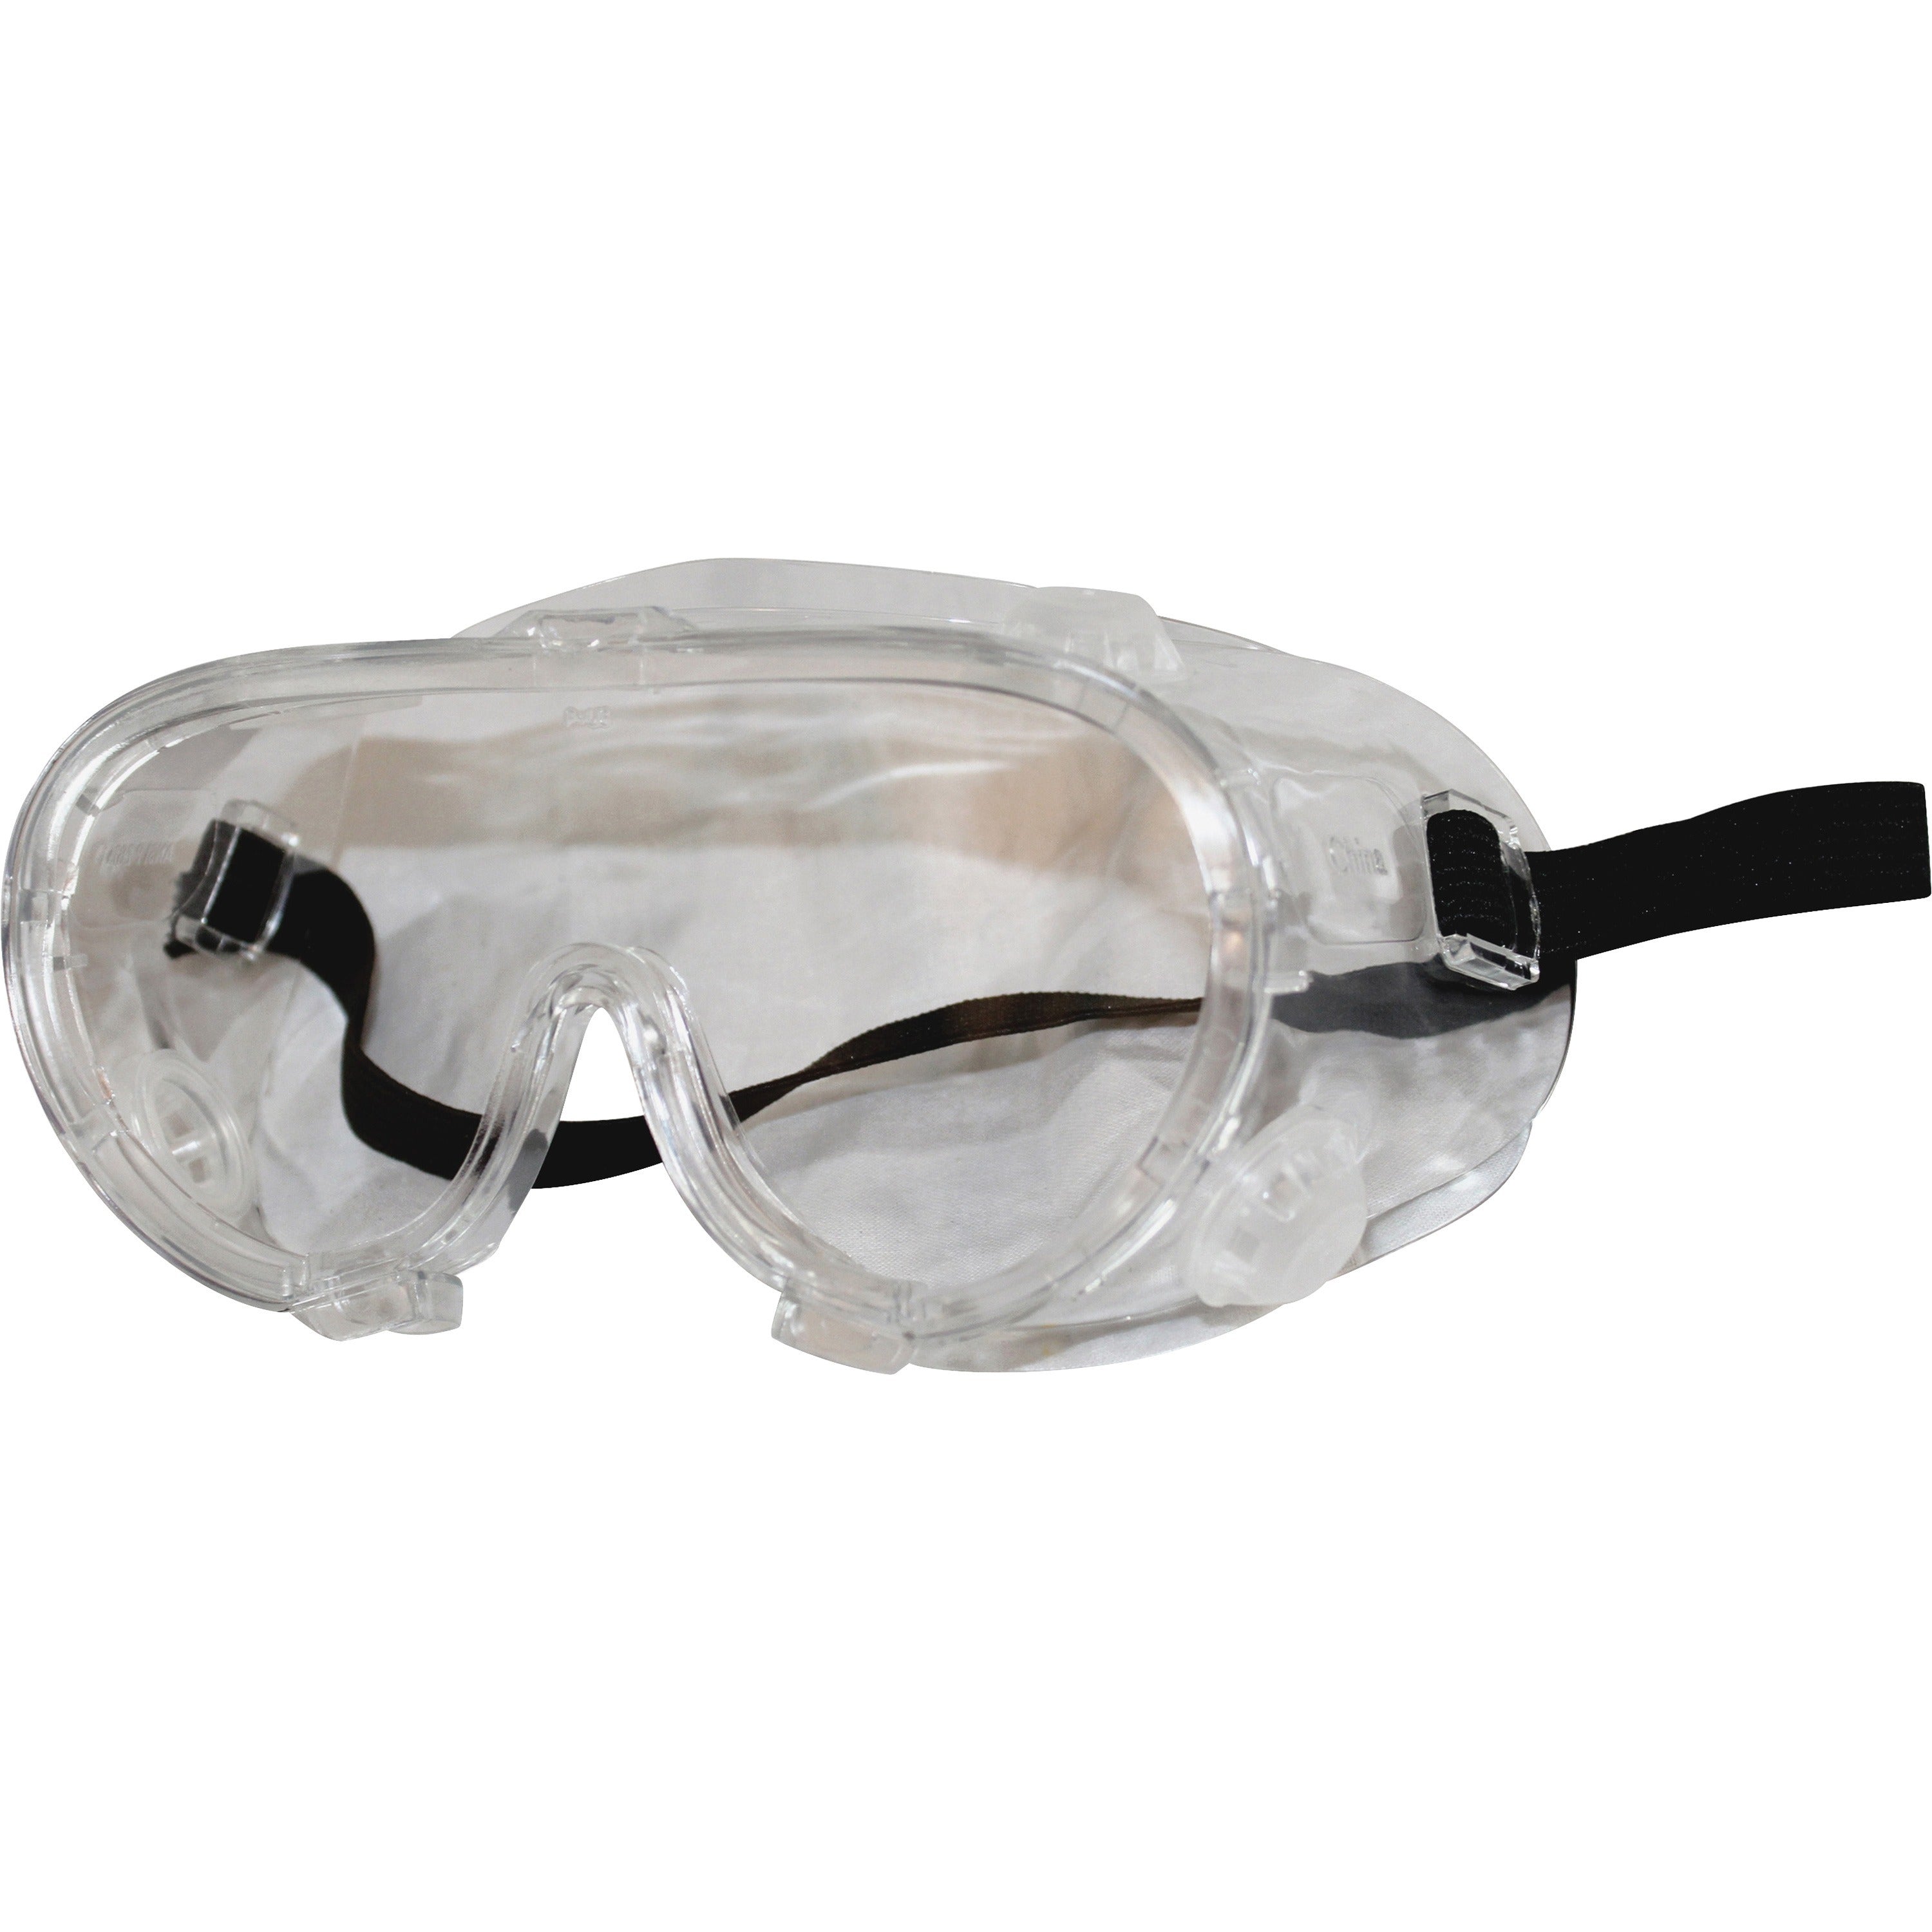 proguard-classic-808-series-safety-goggles_pgd7321ct - 1